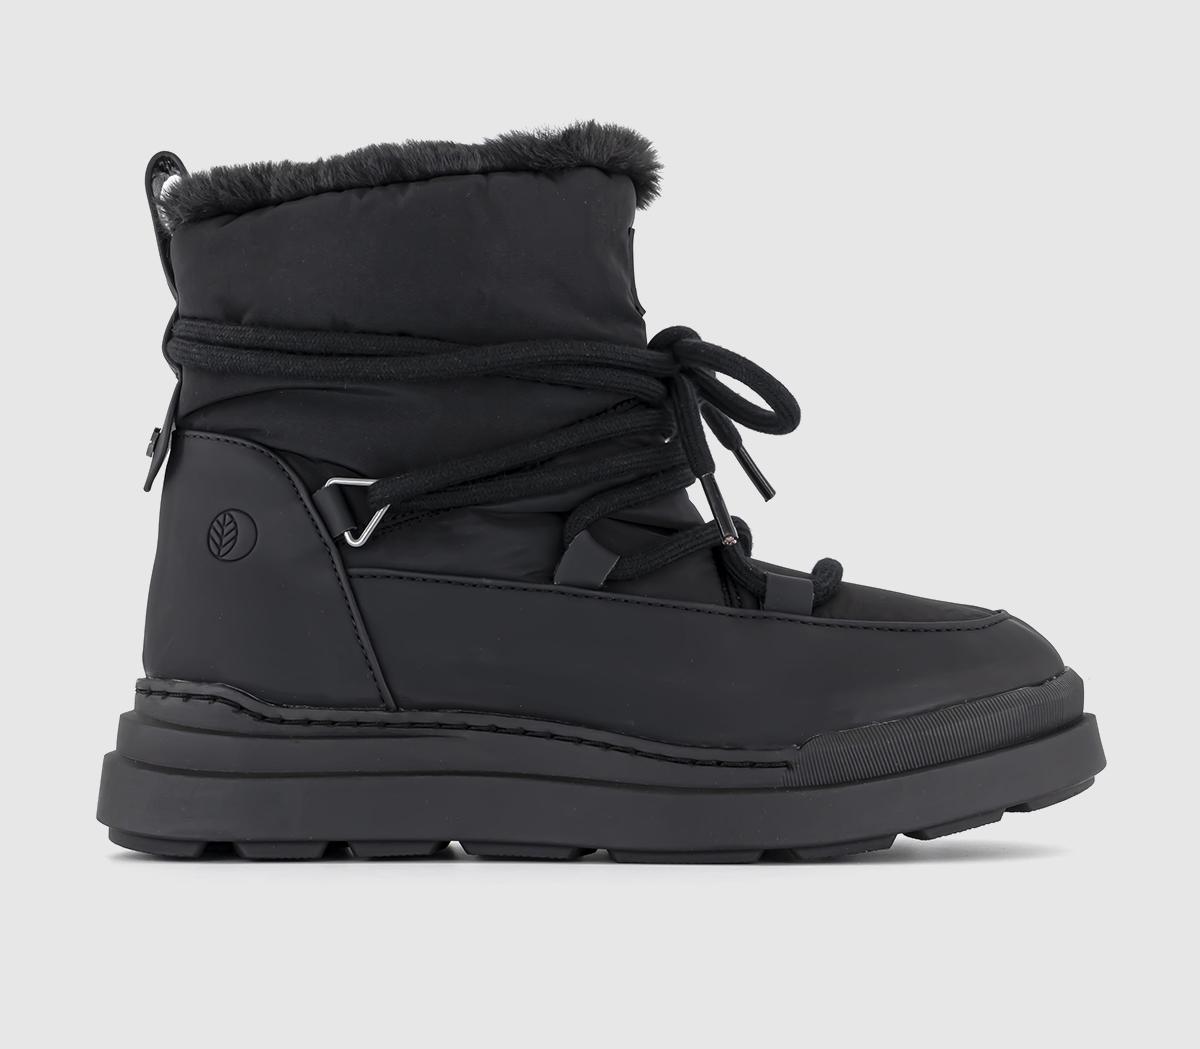 Earth Addict: Eira Warm Lined Snow Boots Black